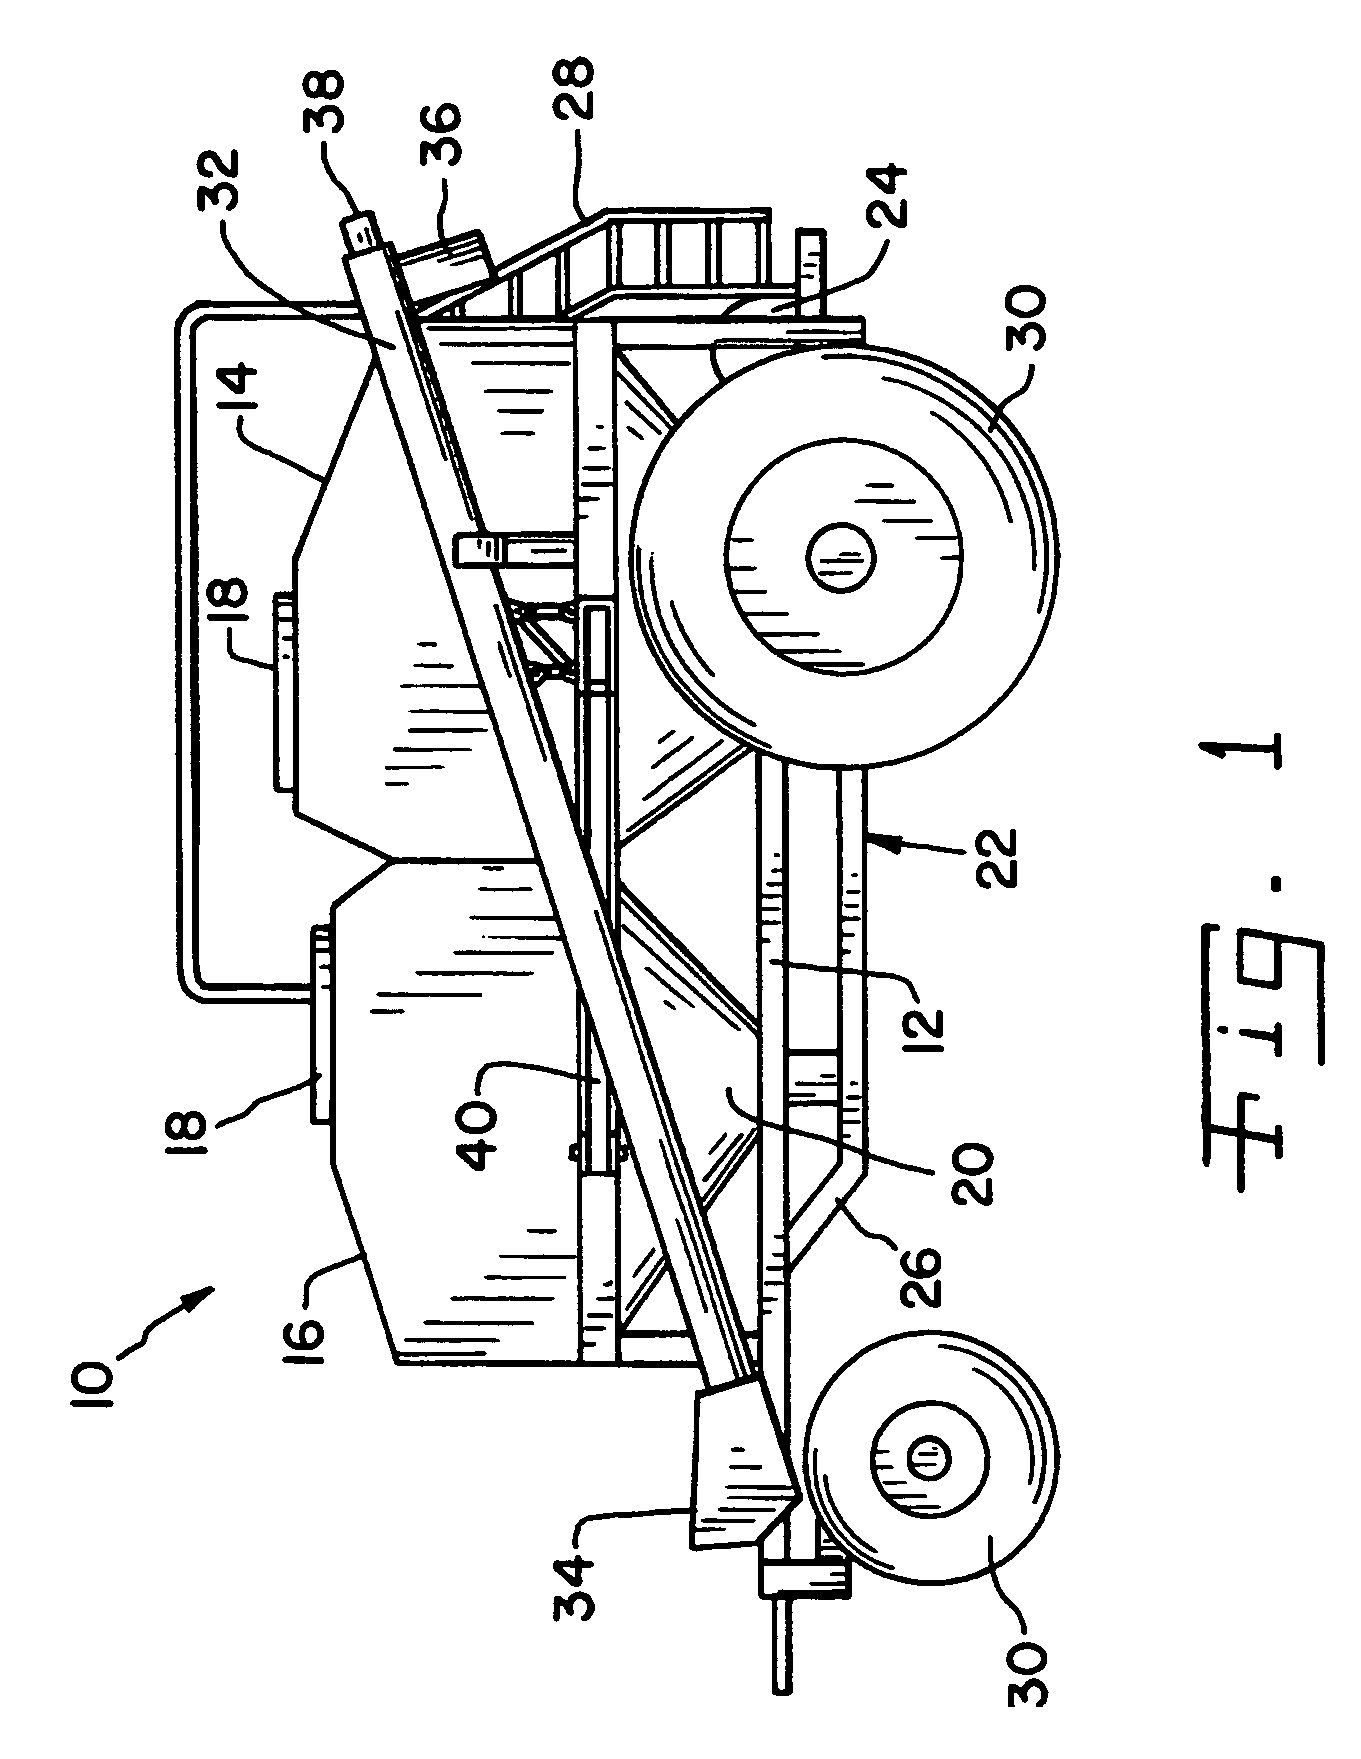 Conveyor positioning system for an air cart in an agricultural seeder